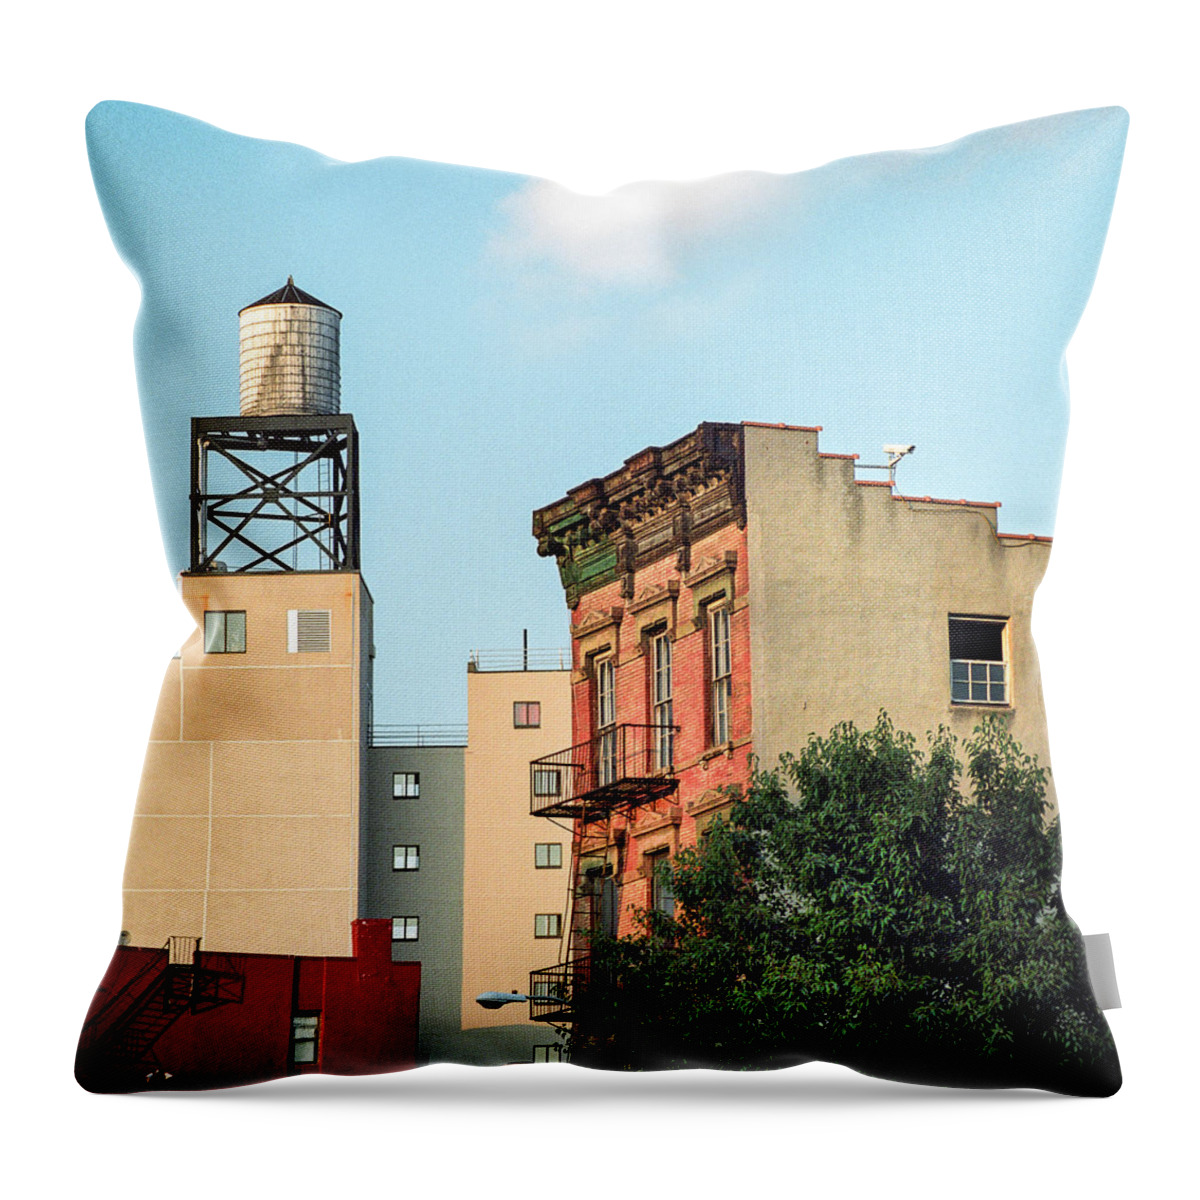 Water Tower Throw Pillow featuring the photograph New York Water Tower 3 by Gary Heller